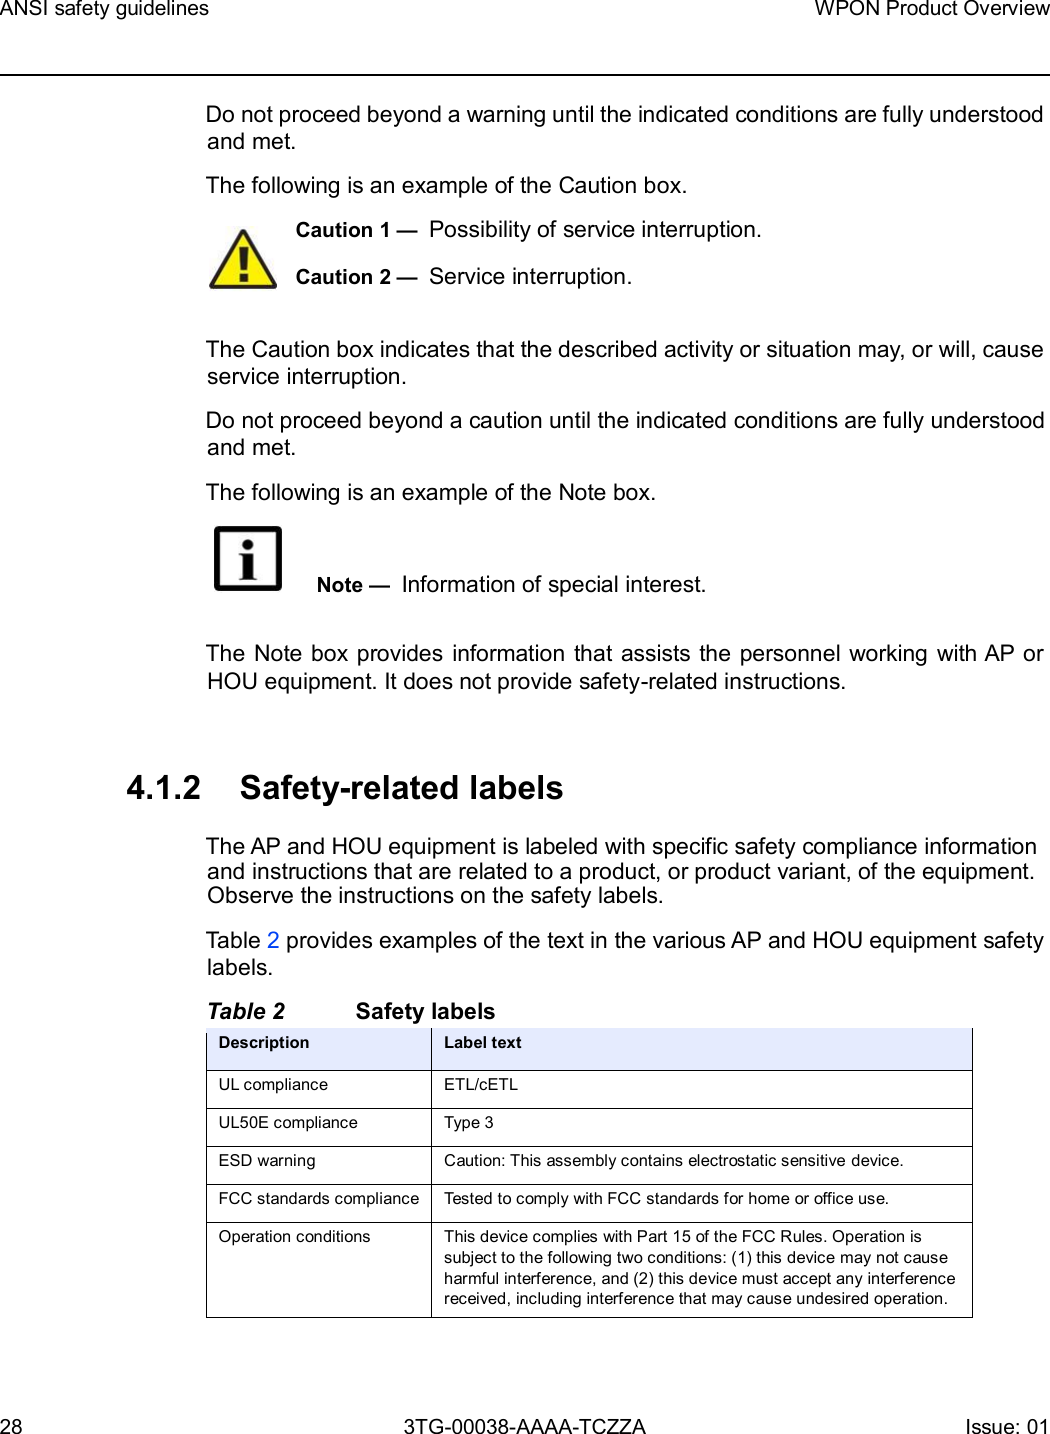 Page 28 of Nokia Bell 7577WPONAPAC WPON User Manual WPON Product Overview